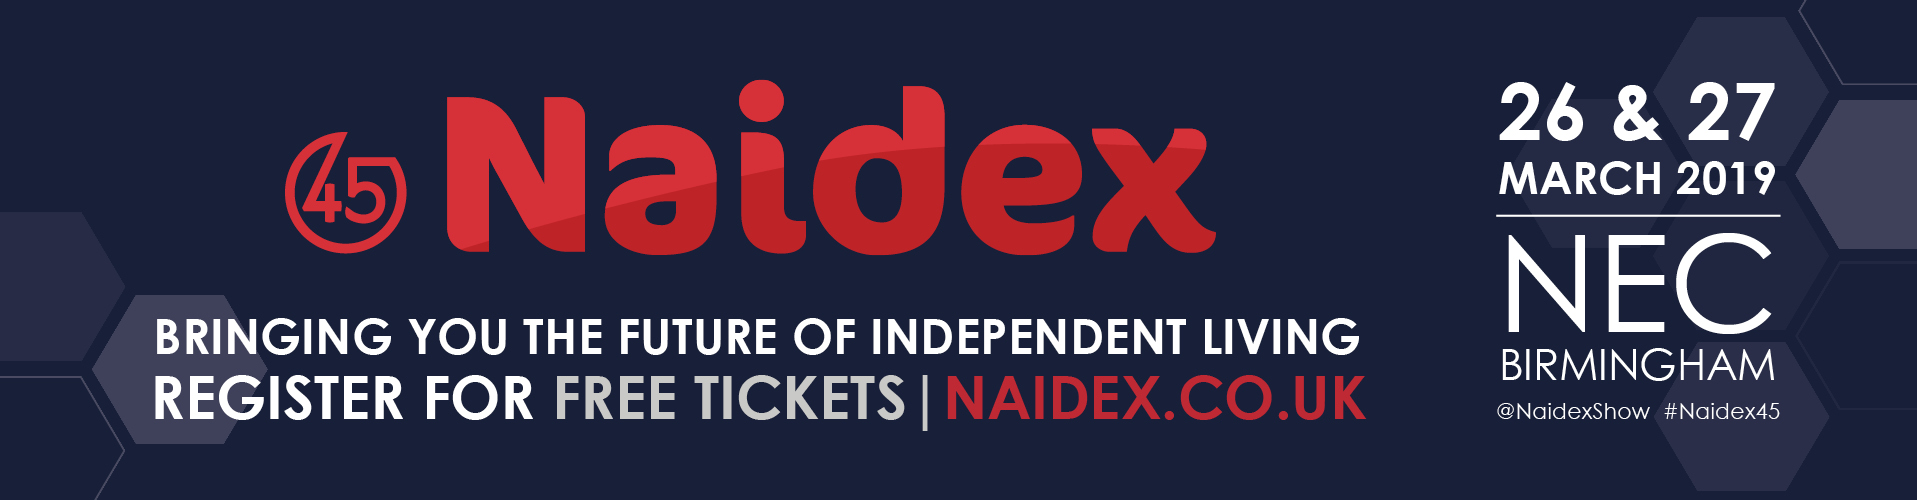 Get your free tickets for Naidex 45 on 26th and 27th March 2019 at the NEC, Birmingham.